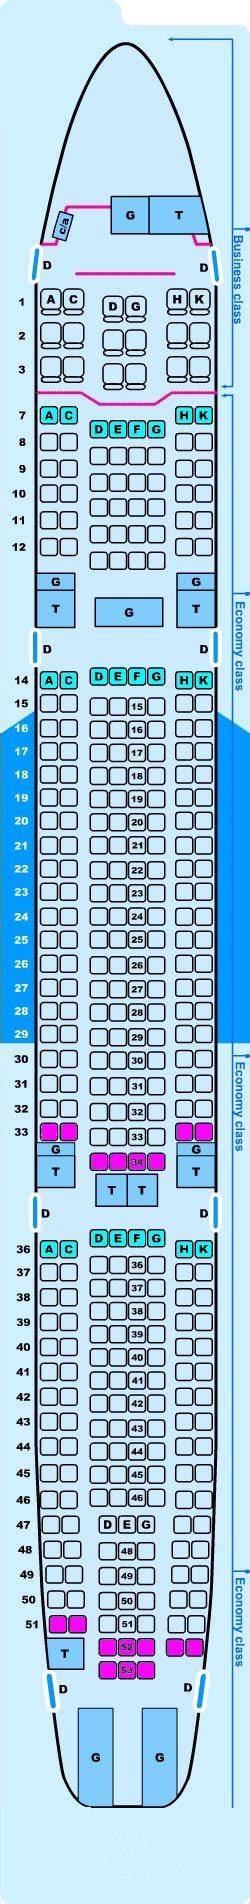 Airbus A Neo Seat Map Image To U